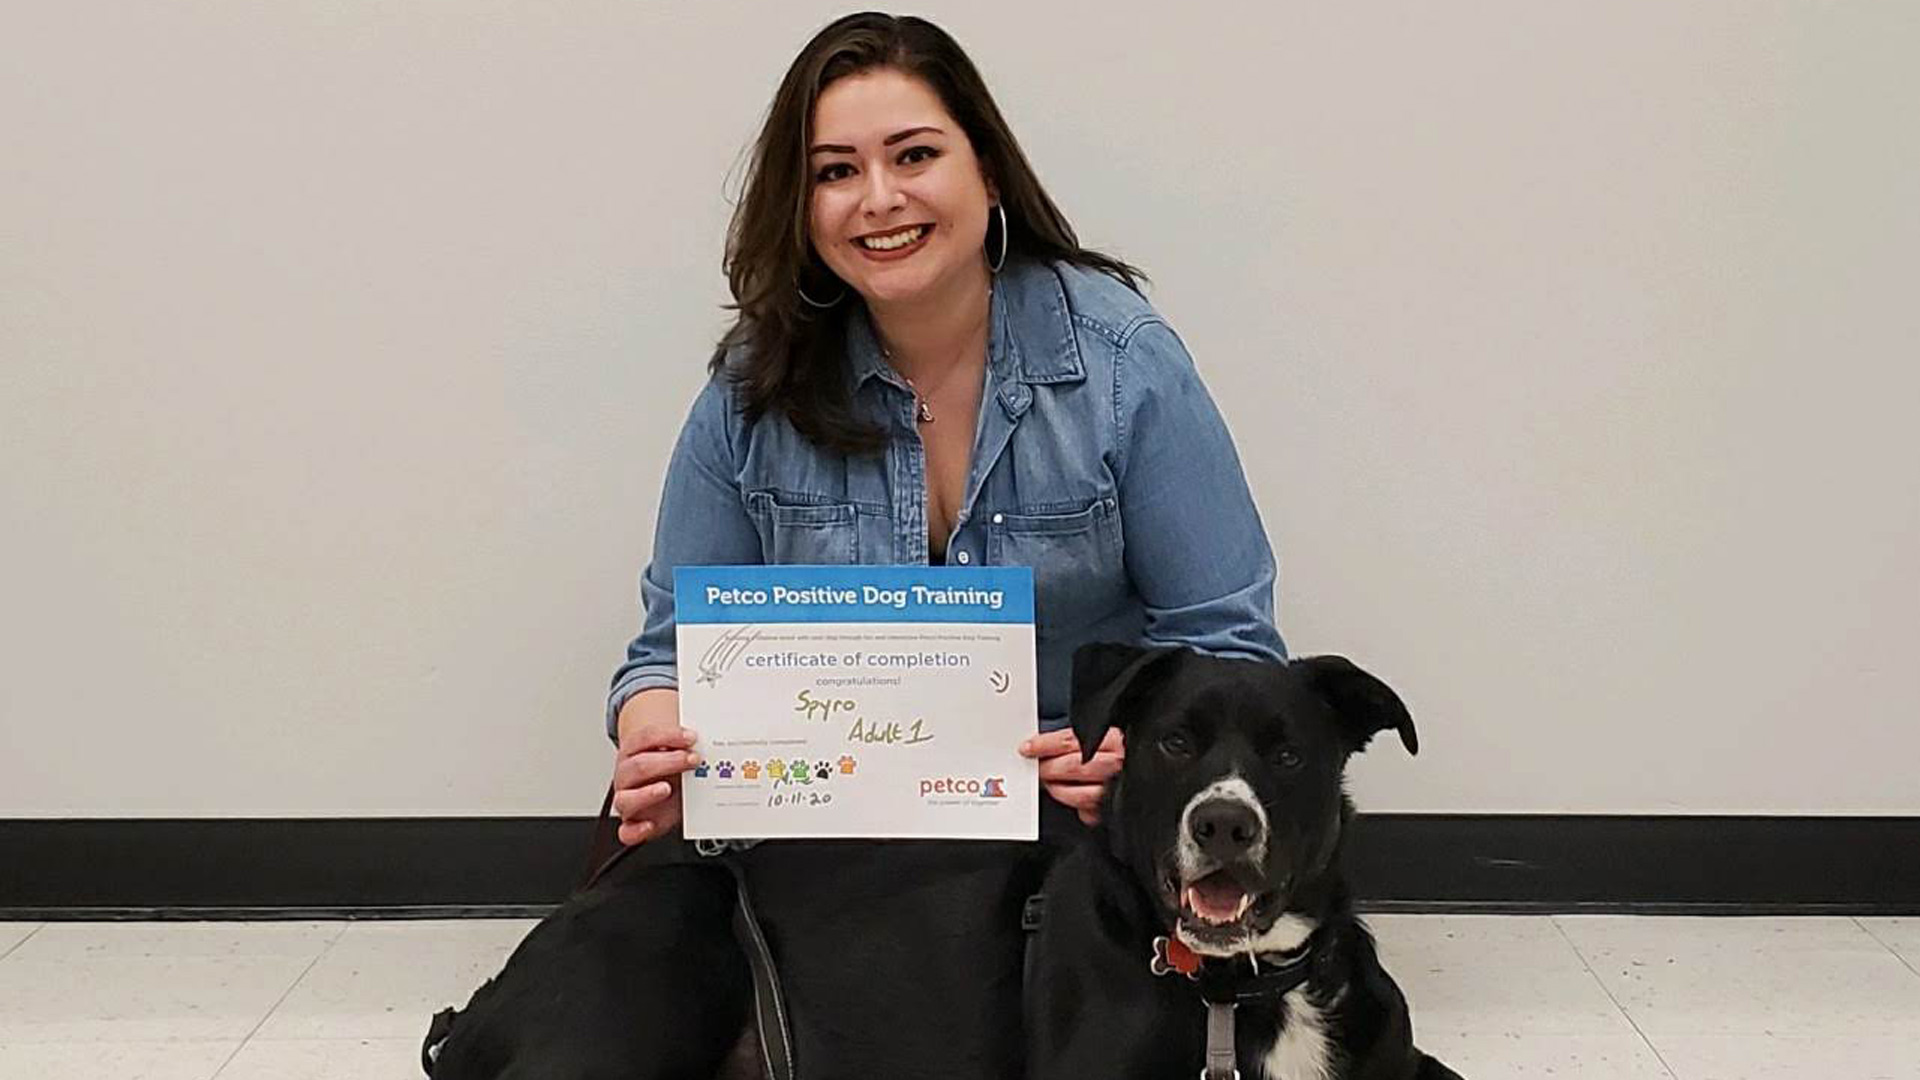 Photo of Allyssa holding a Dog Training certificate of completion next to a black dog.